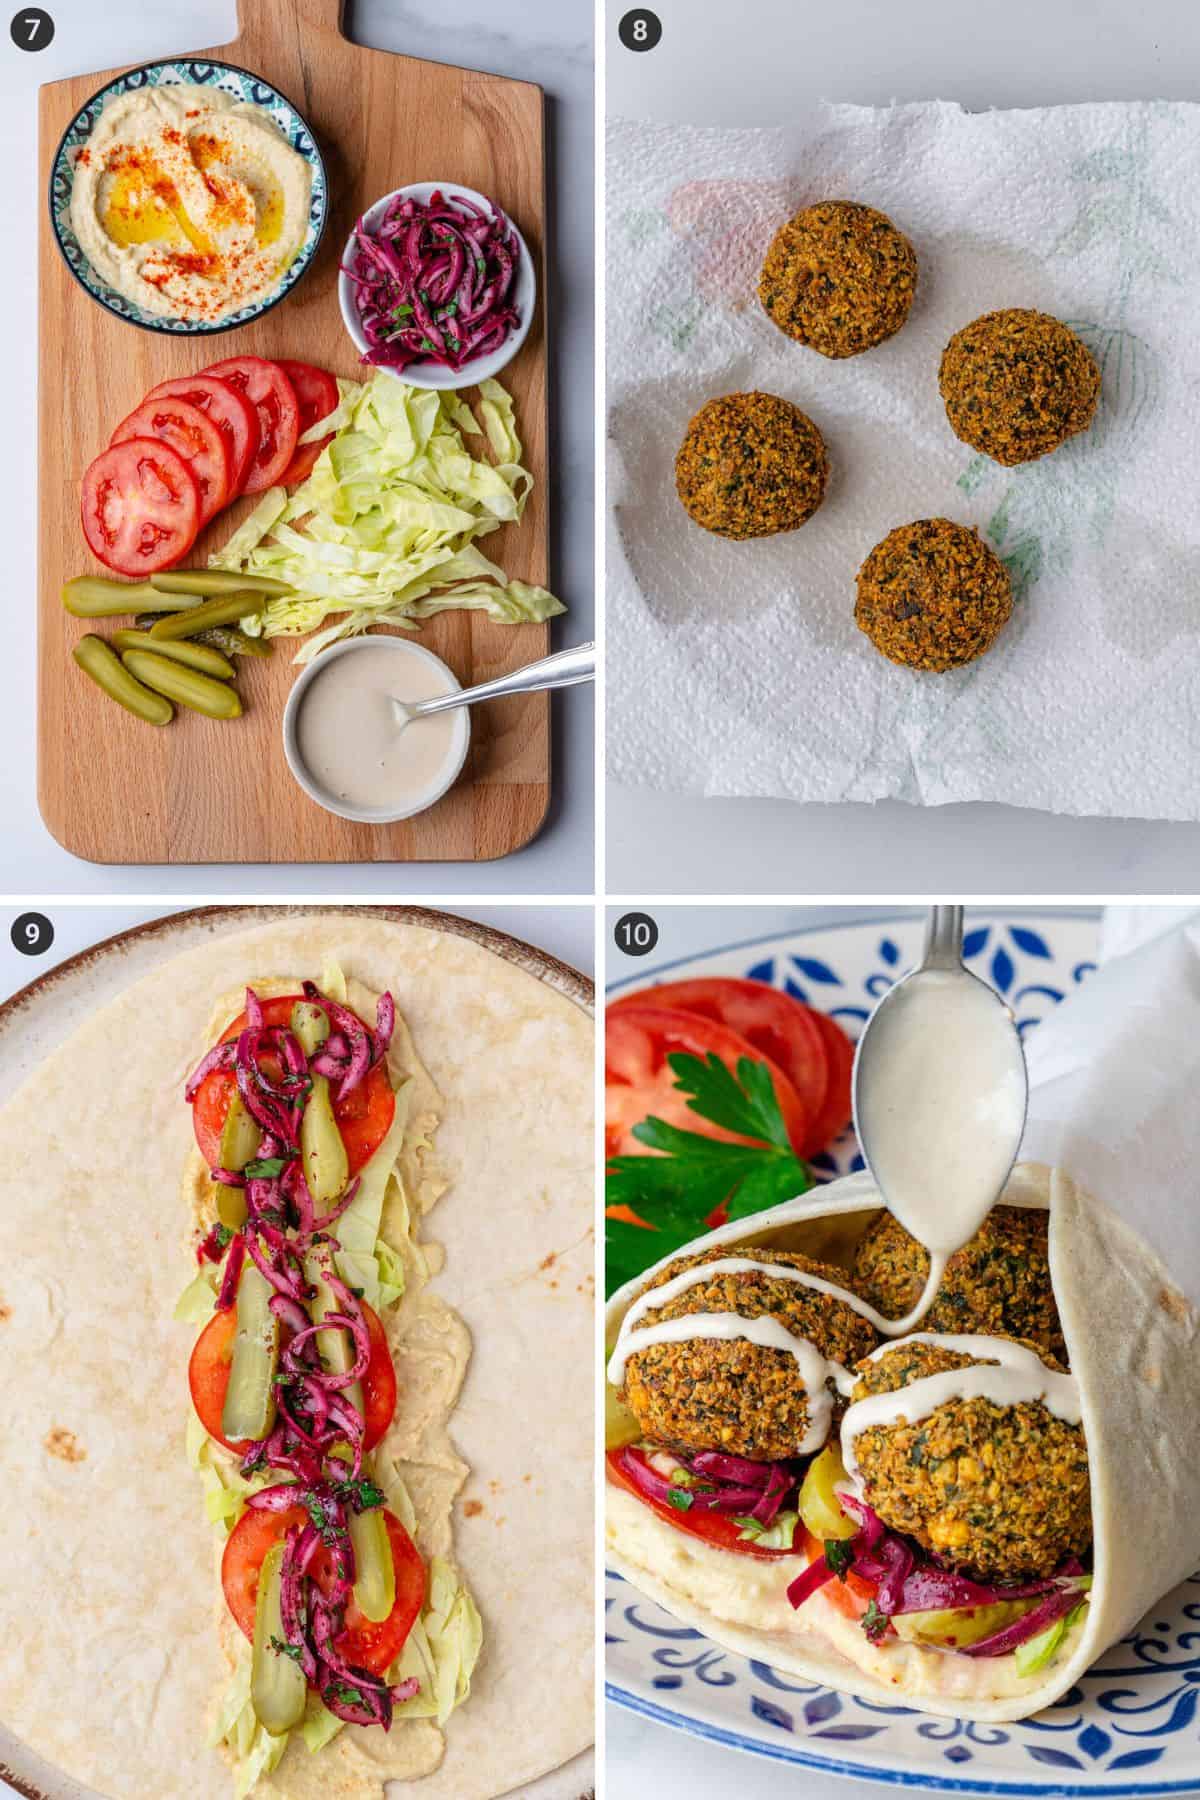 Steps 7 to 10 on how to make a falafel wrap